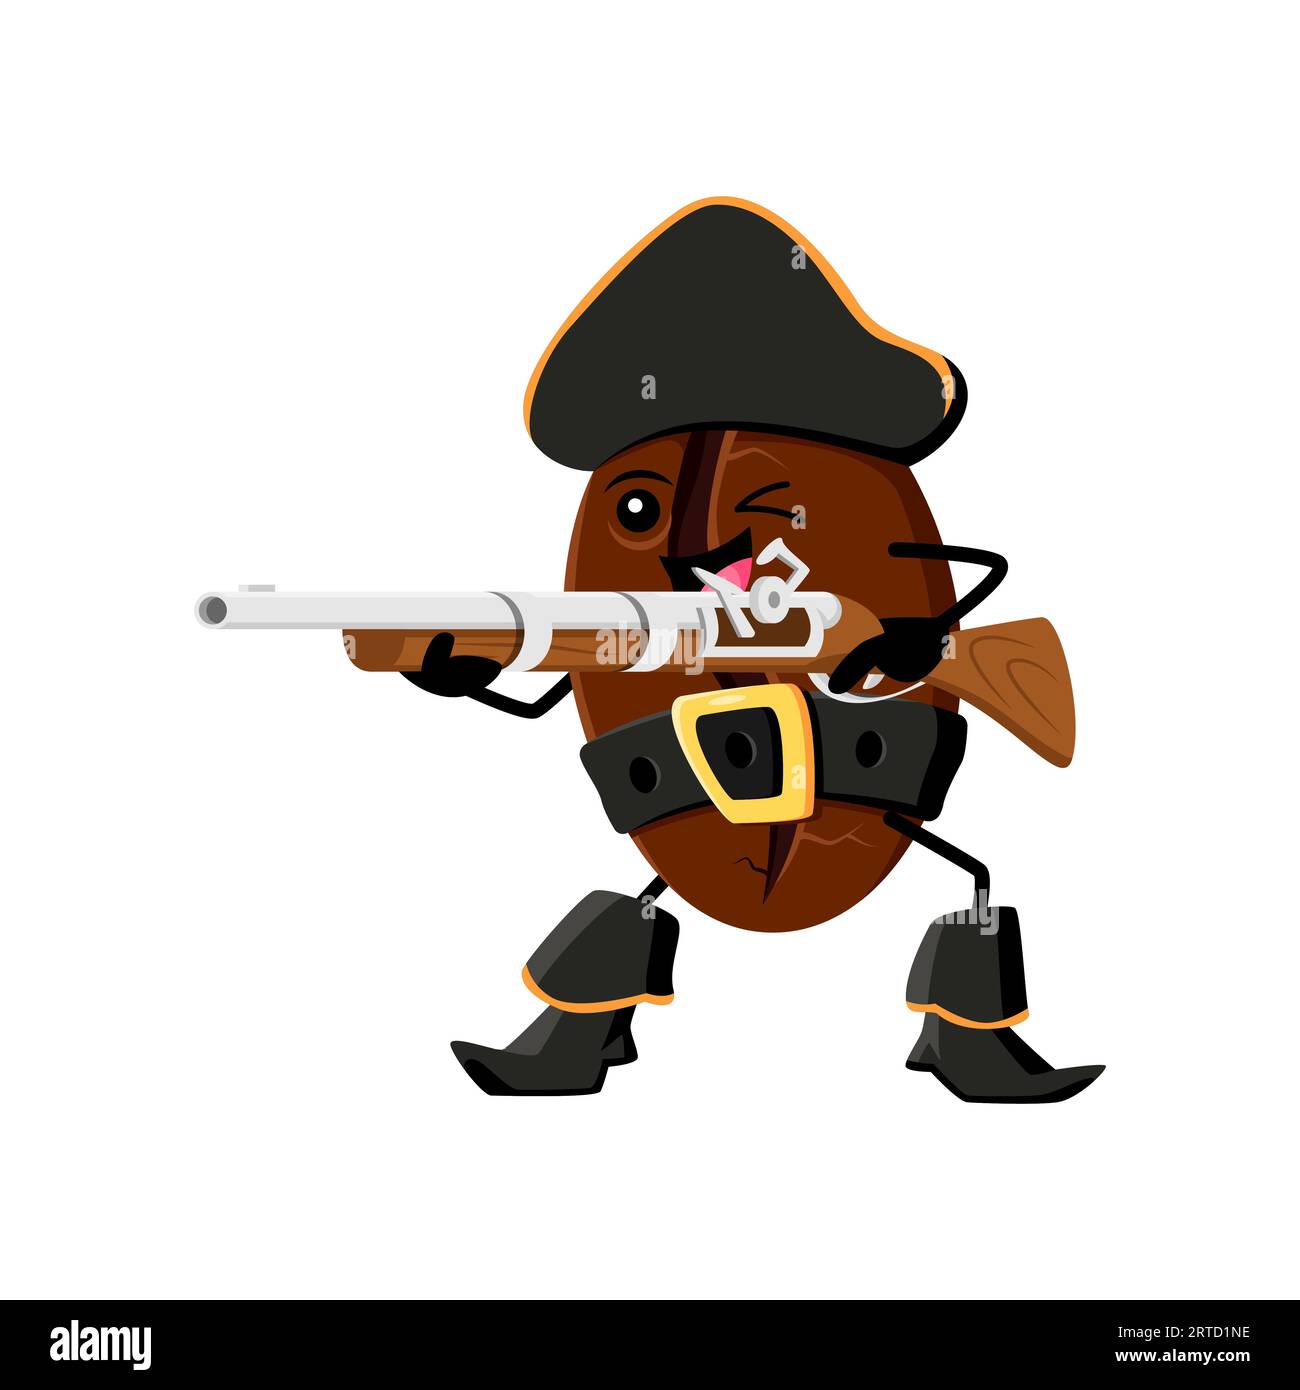 https://c8.alamy.com/comp/2RTD1NE/cartoon-coffee-bean-pirate-character-with-musket-vector-fierce-arabica-grain-personage-ready-for-adventure-on-the-high-seas-funny-buccaneer-with-a-w-2RTD1NE.jpg